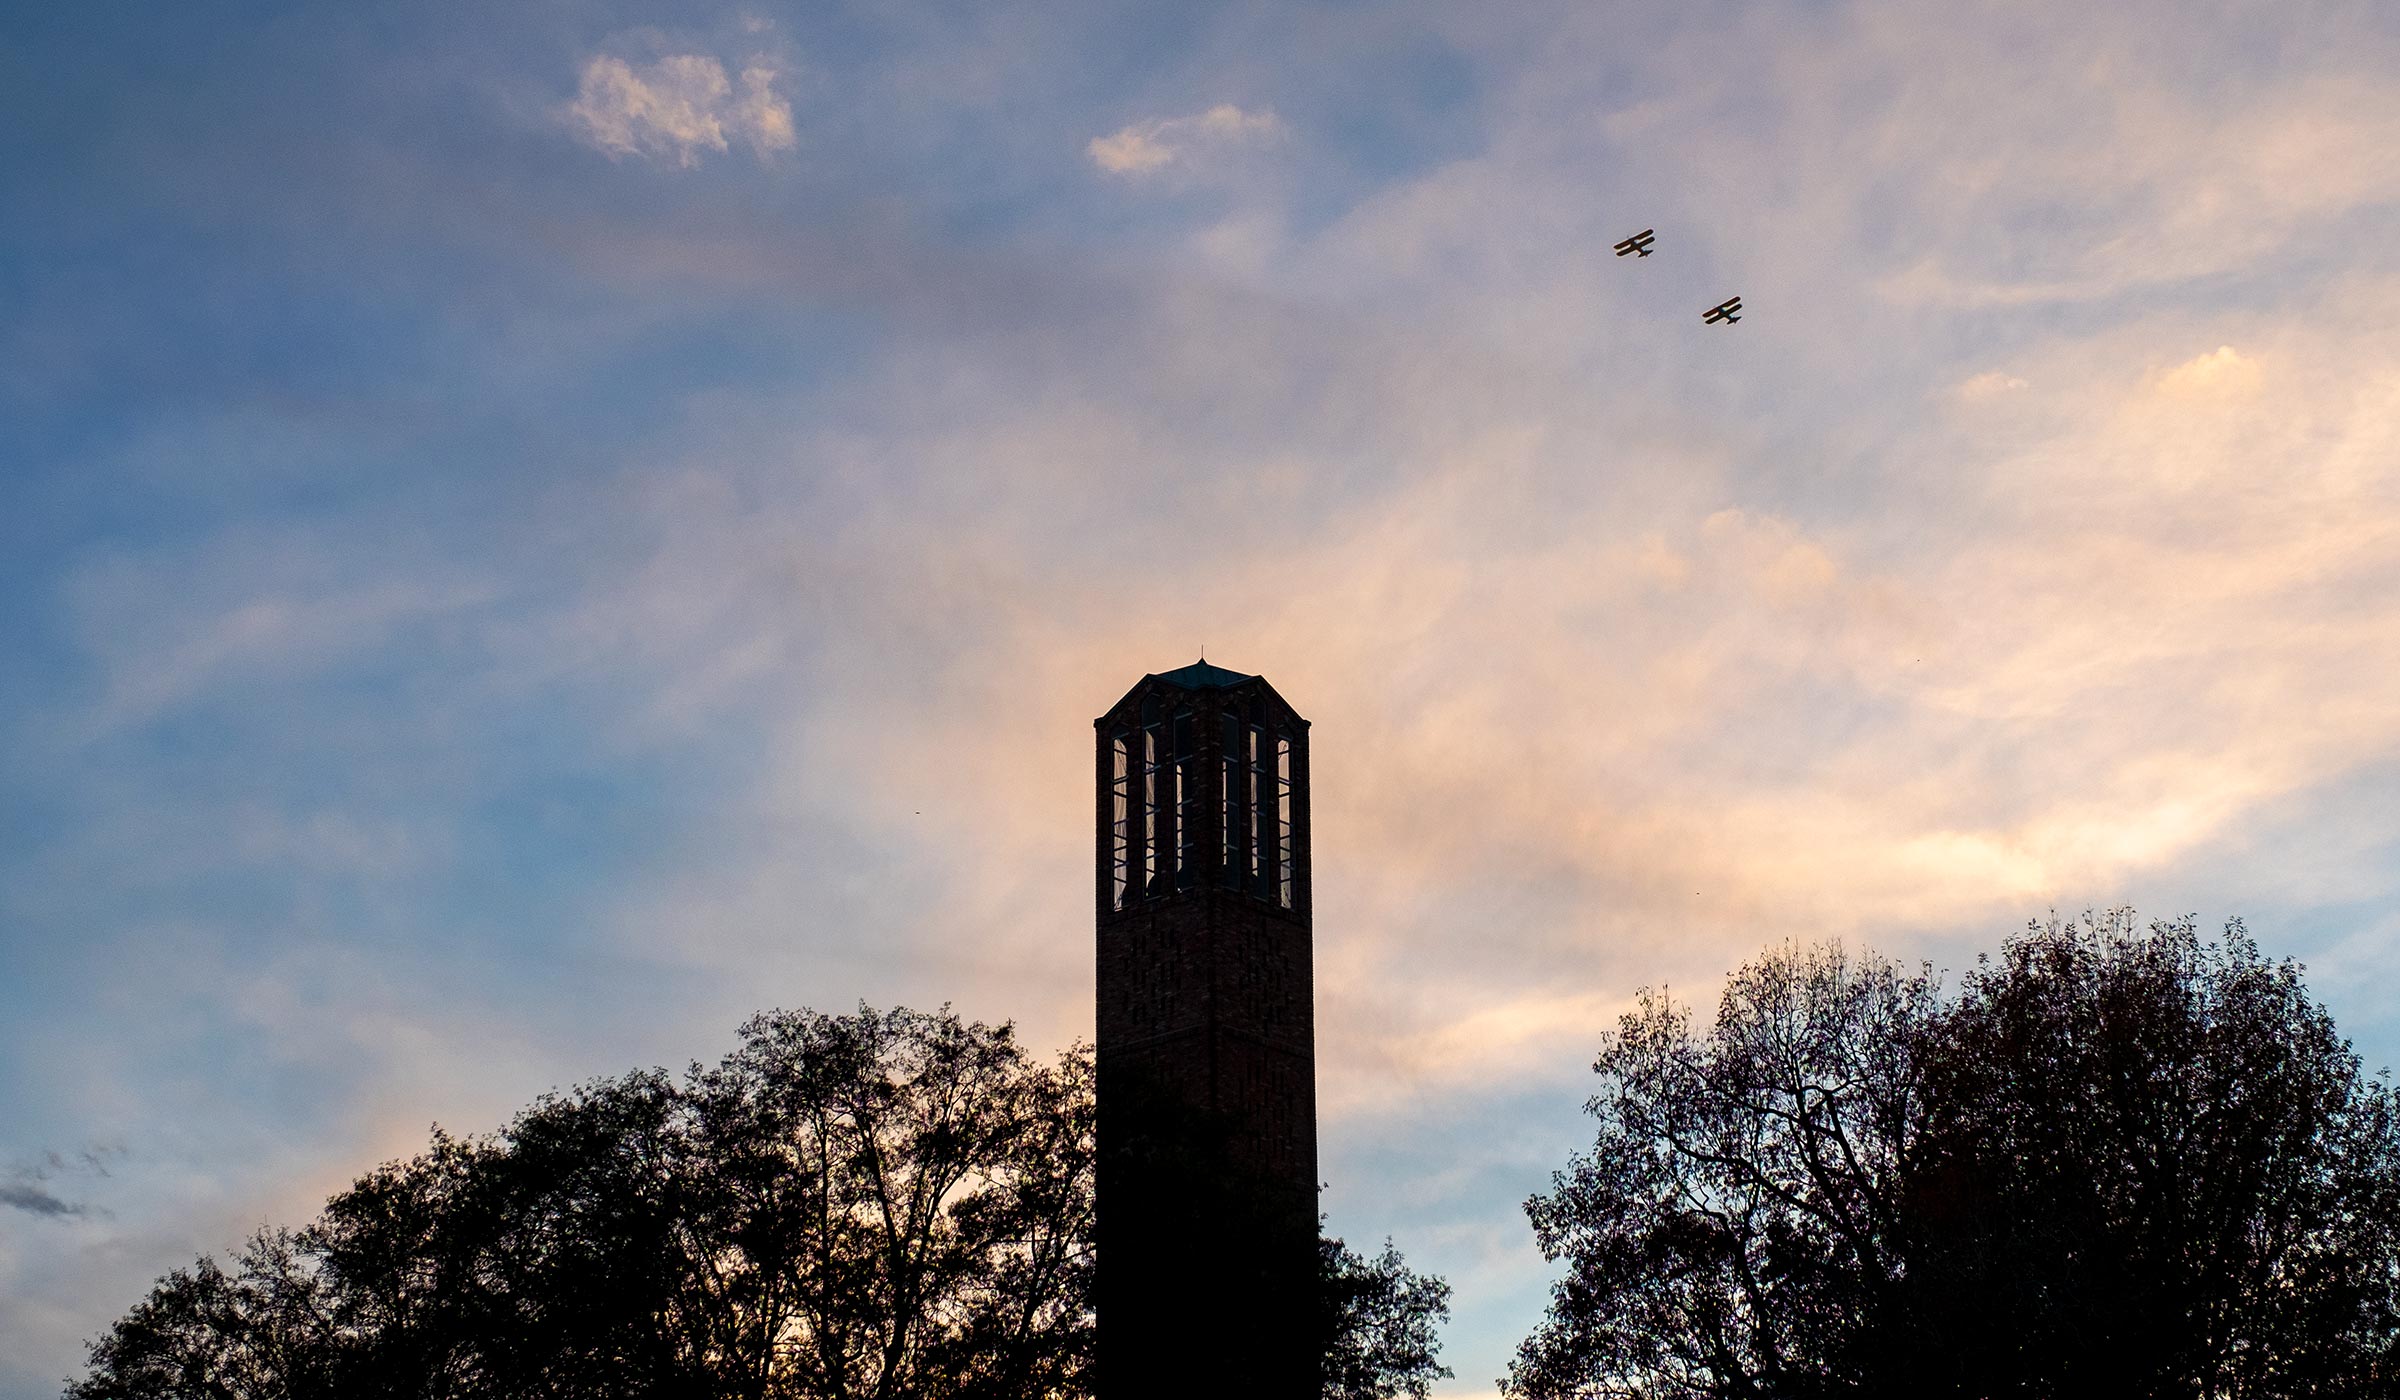 Chapel tower with pair of biplanes against the sunset clouds.